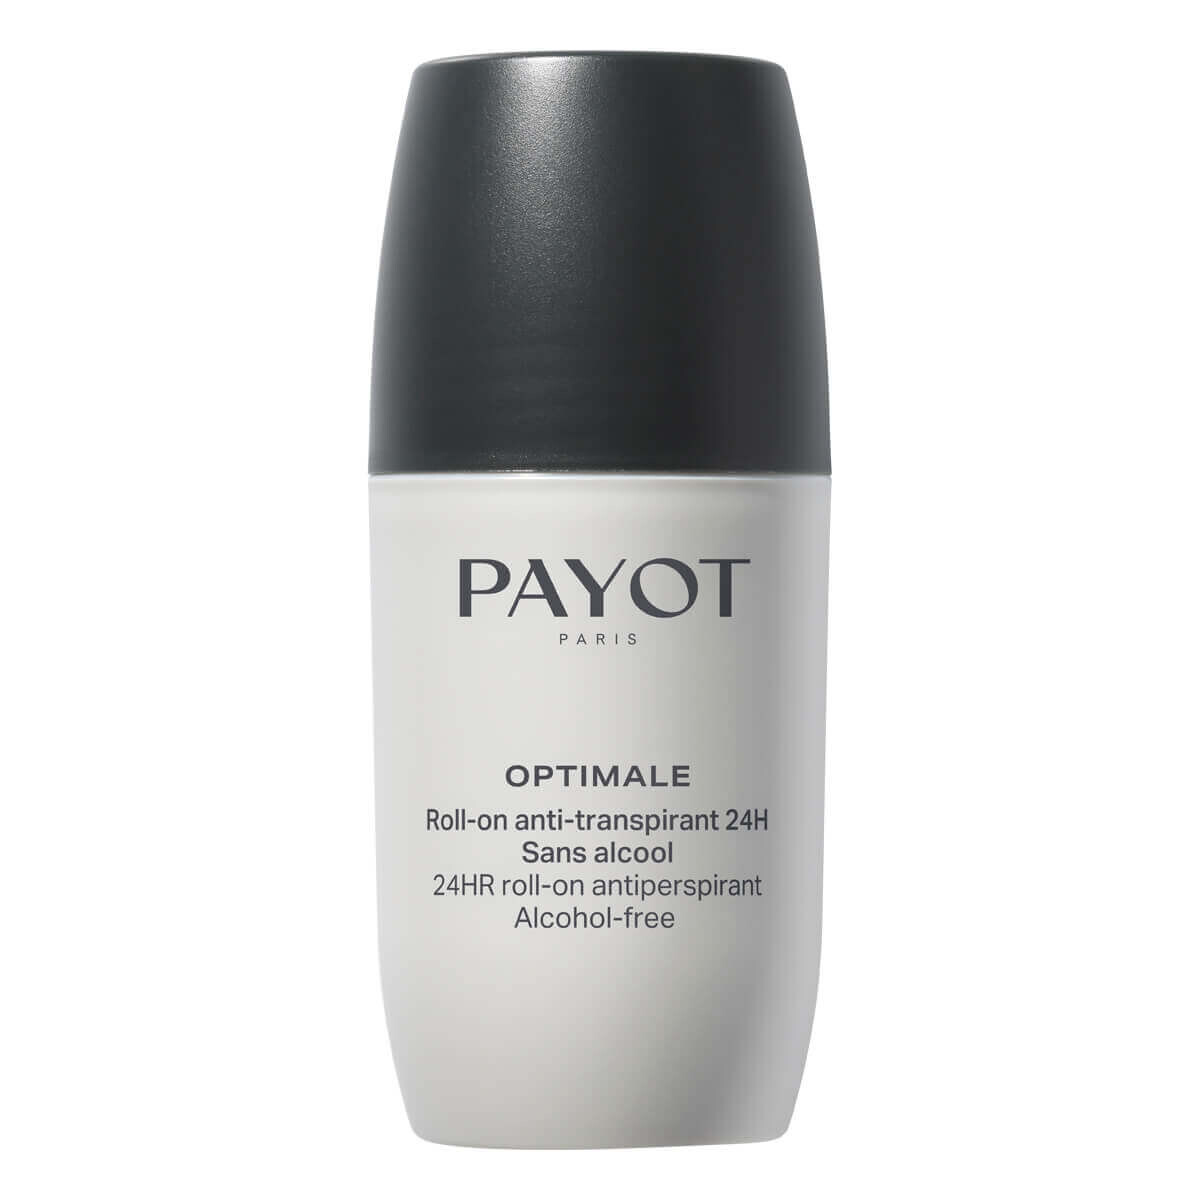 Payot Optimale 24hr Anti-perspirant Roll-On Deodorant, Alcohol free, 75 ml.